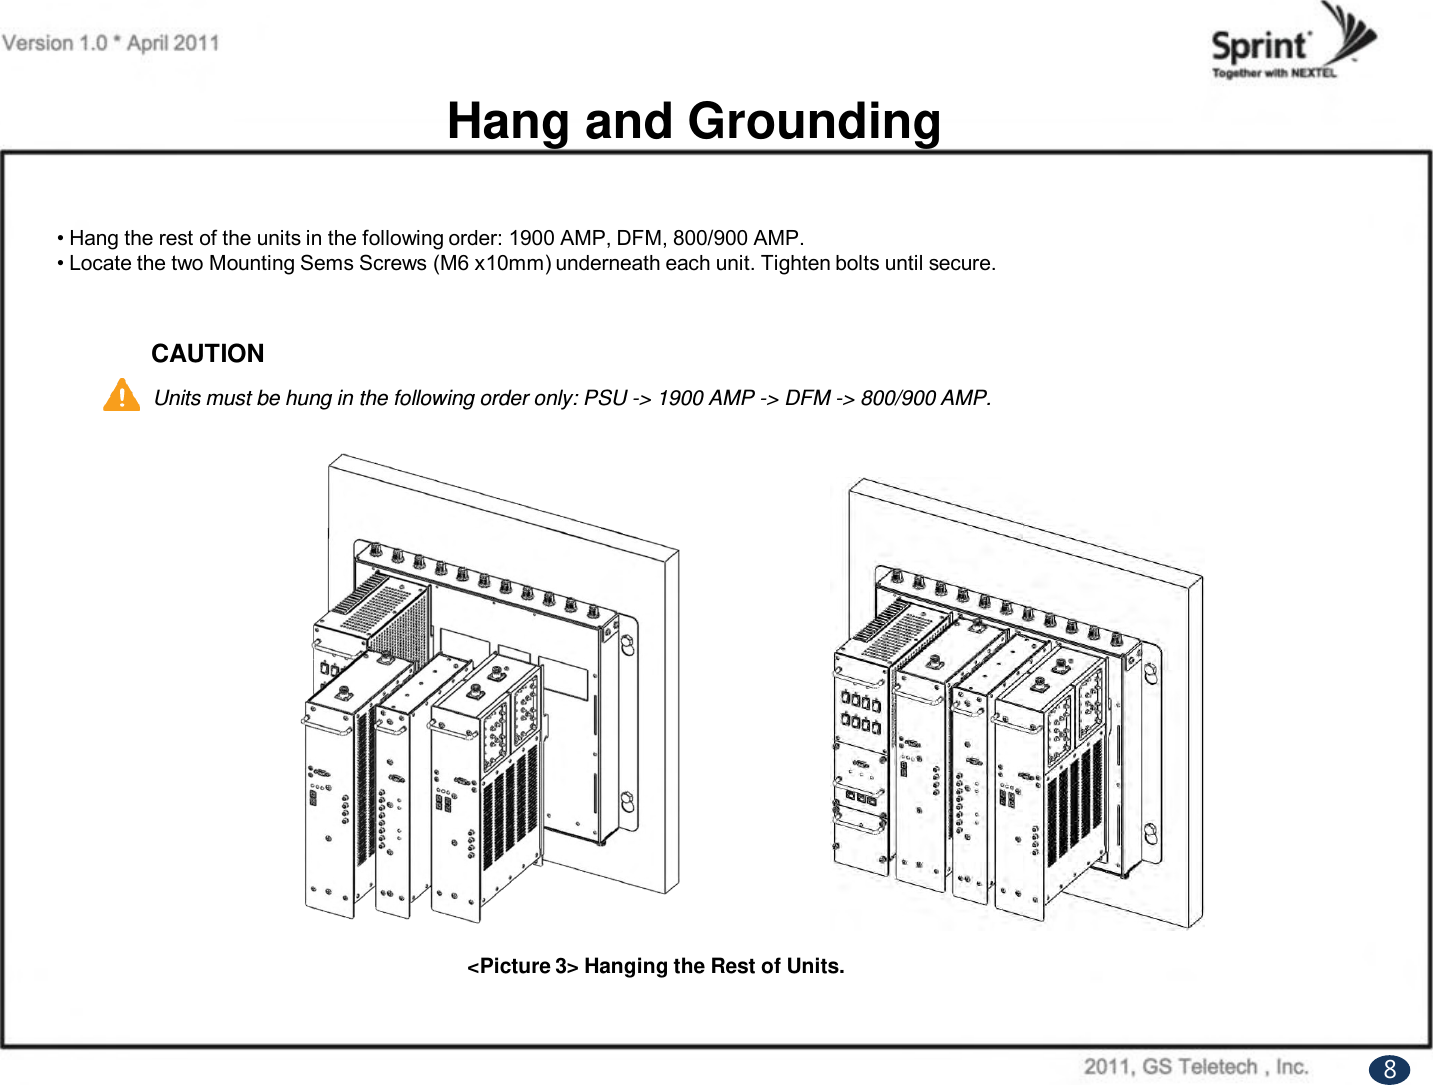 Hang and Grounding• Hang the rest of the units in the following order: 1900 AMP, DFM, 800/900 AMP.• Locate the two Mounting Sems Screws (M6 x10mm) underneath each unit. Tighten bolts until secure.&lt;Picture 3&gt; Hanging the Rest of Units. CAUTIONUnits must be hung in the following order only: PSU -&gt; 1900 AMP -&gt; DFM -&gt; 800/900 AMP. 8